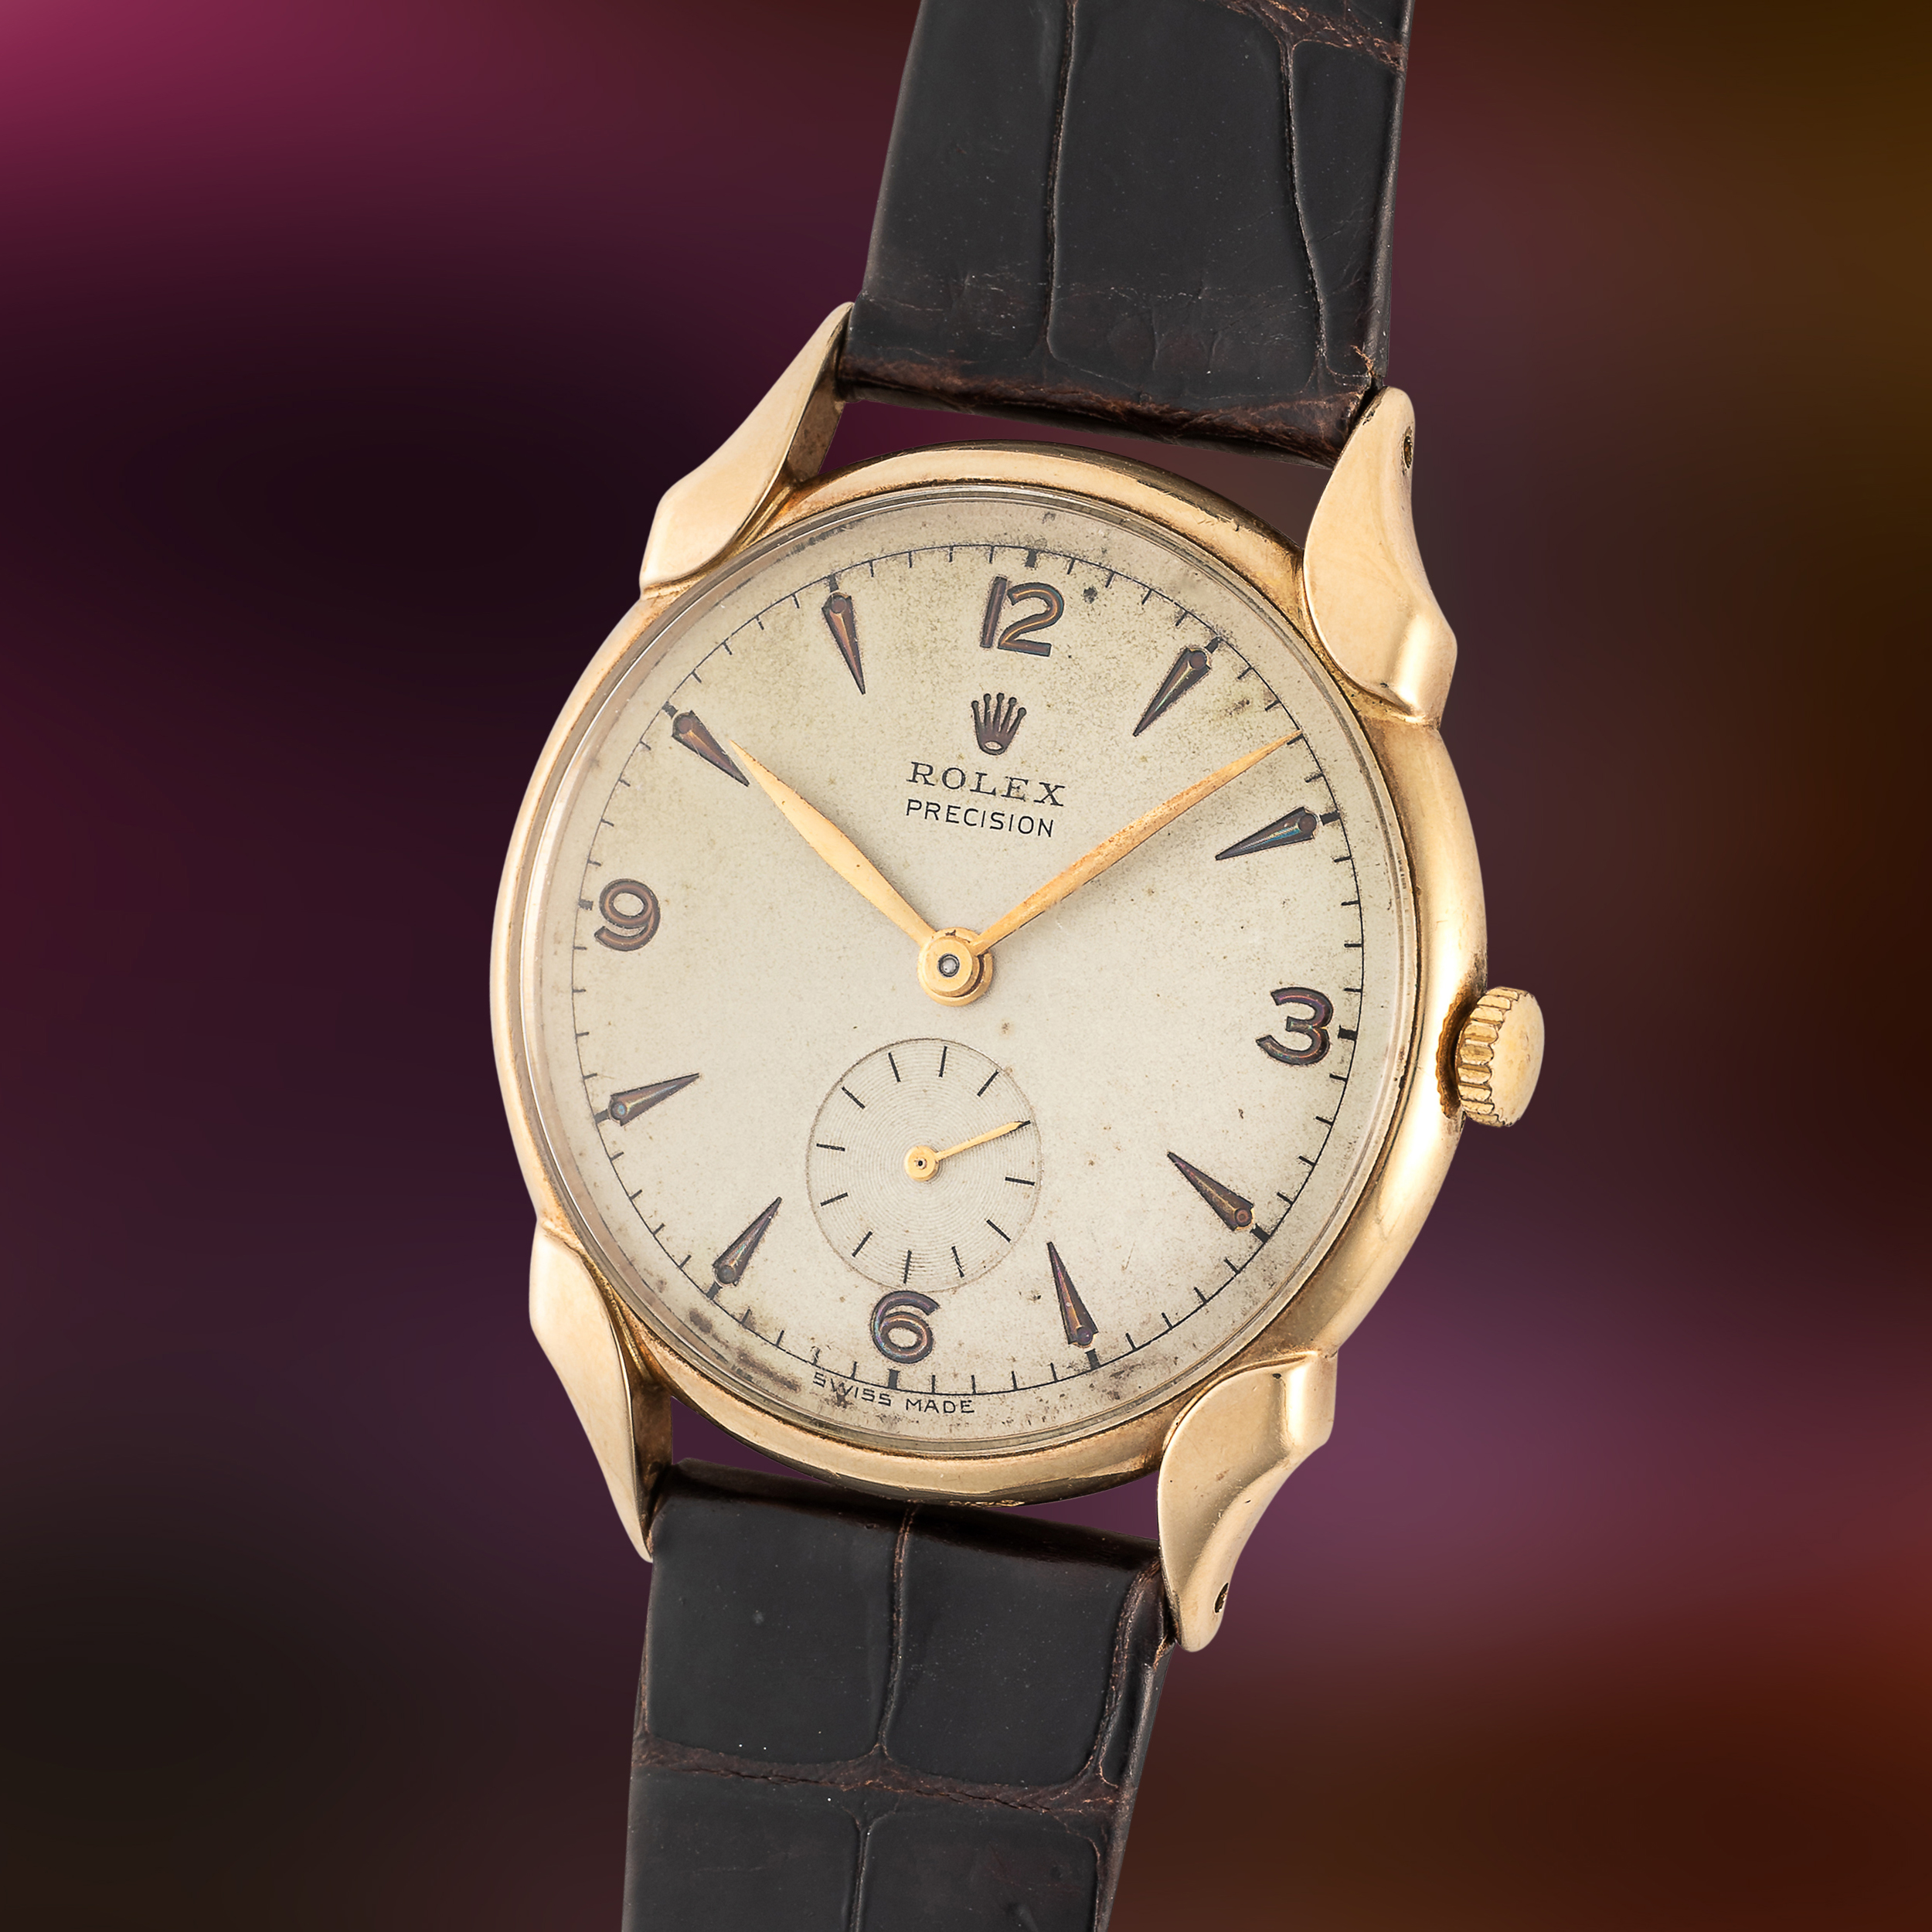 A RARE GENTLEMAN'S SIZE 9CT SOLID GOLD ROLEX PRECISION WRIST WATCH CIRCA 1950s, WITH SCALLOPED